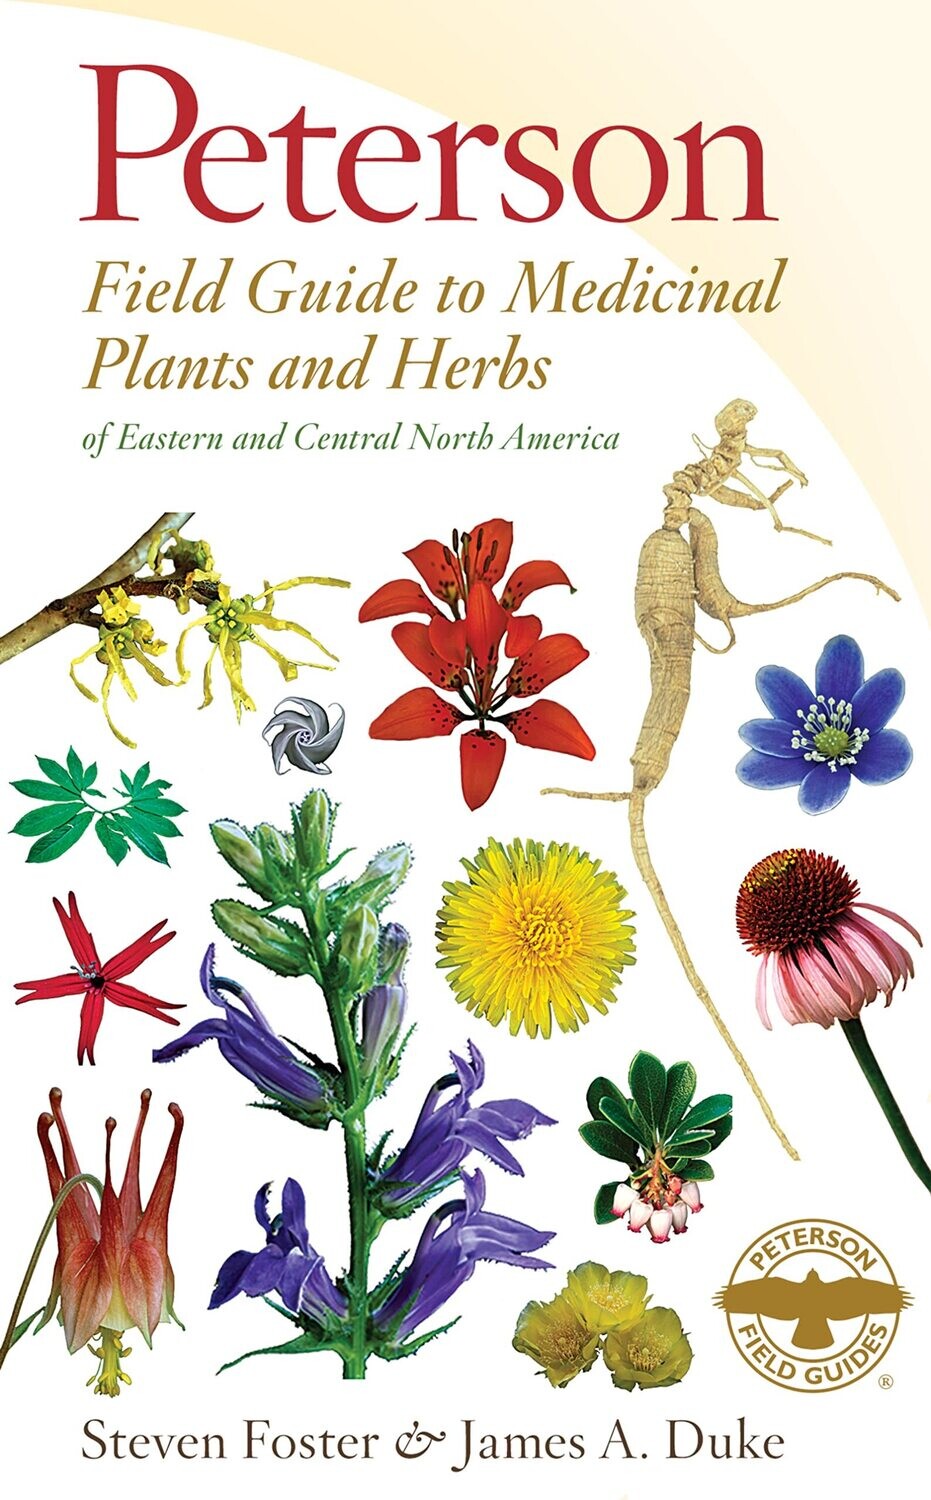 Field Guide To Medicinal Plants And Herbs - Peterson